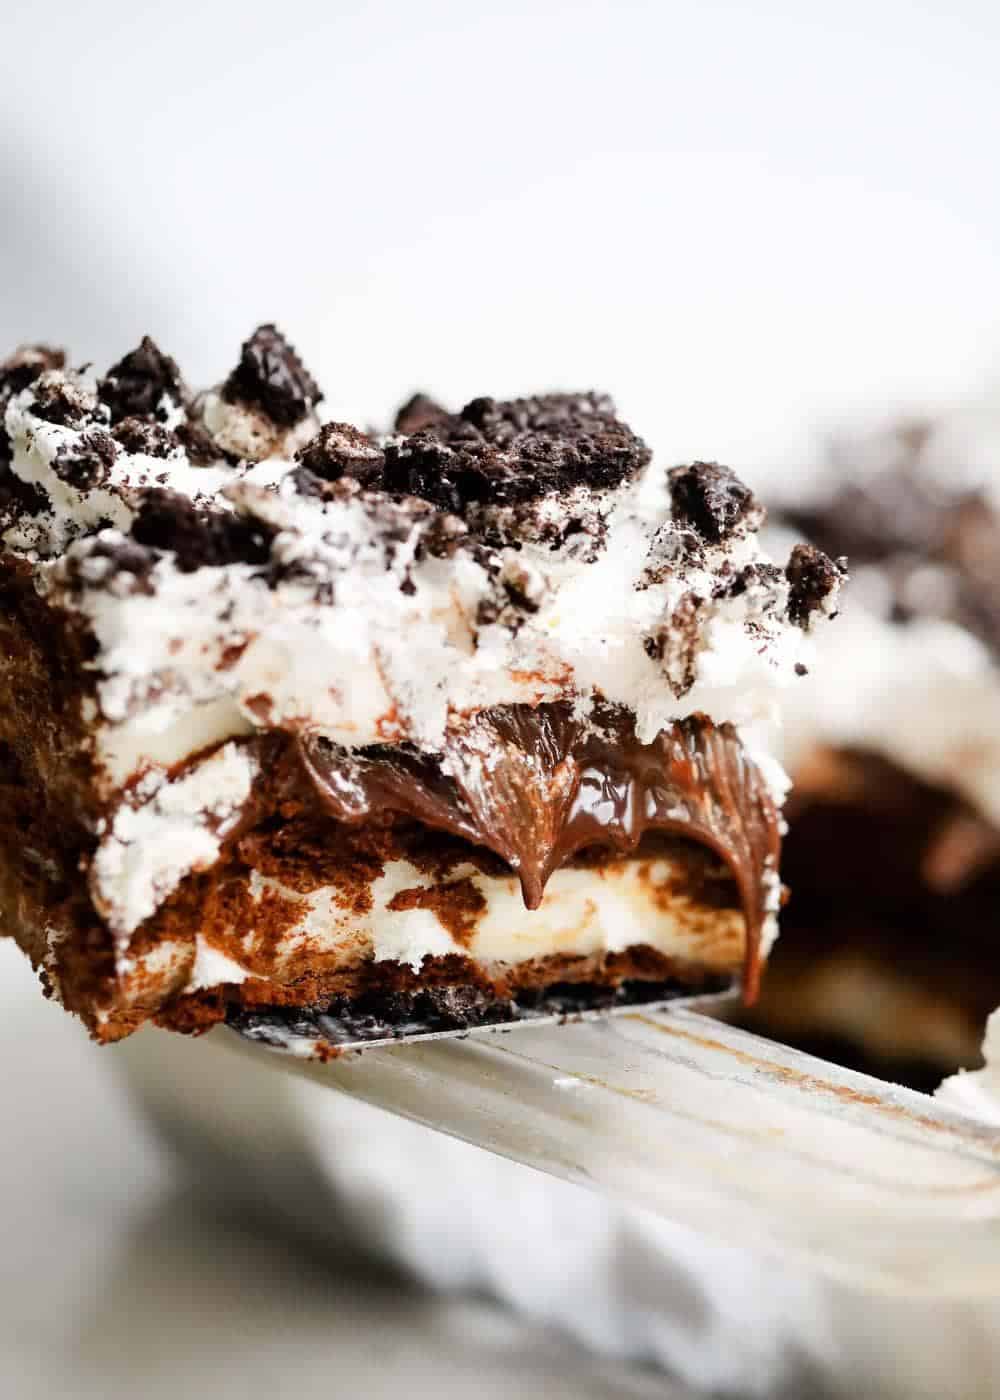 Piece of Oreo ice cream cake with hot fudge oozing out.